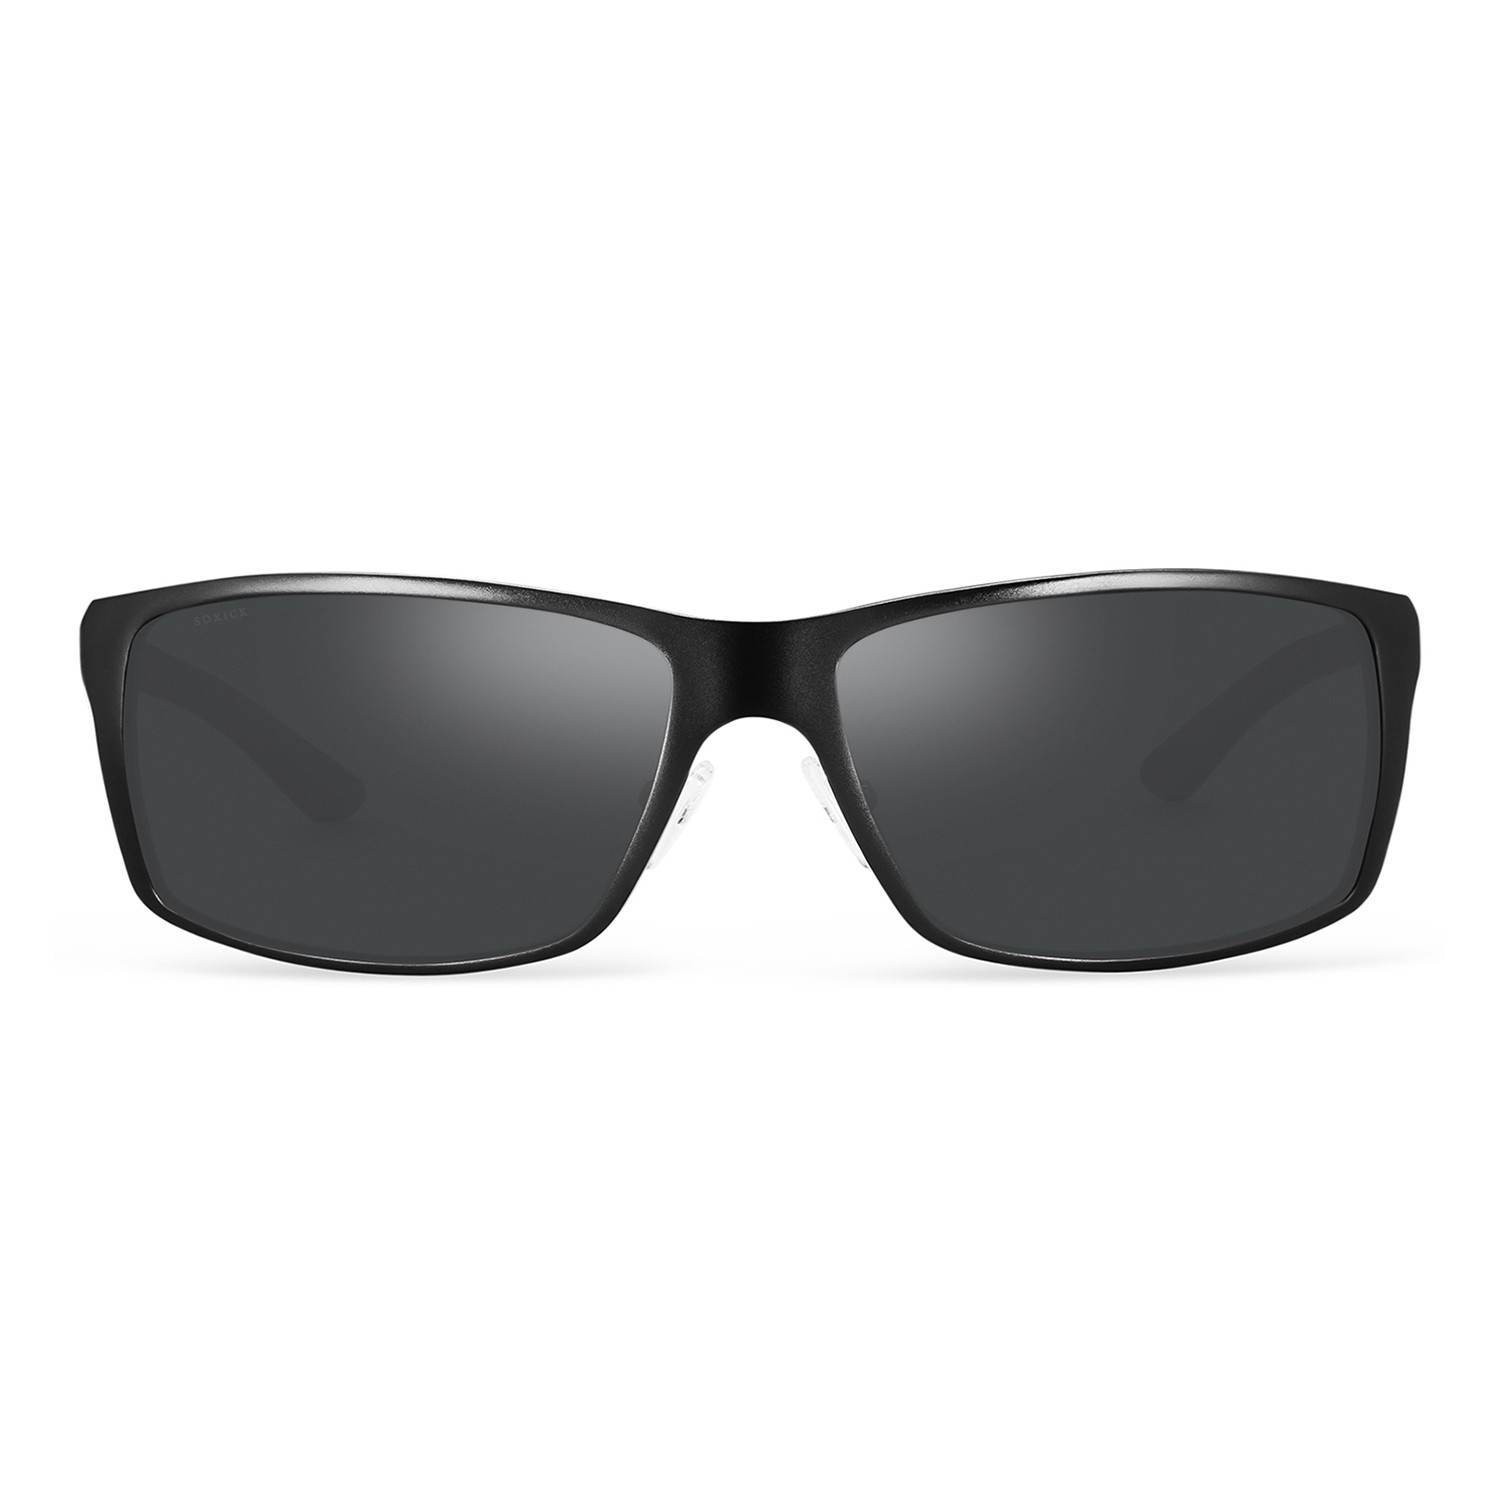 Sunglasses // 999/ Black - Soxick - Touch of Modern